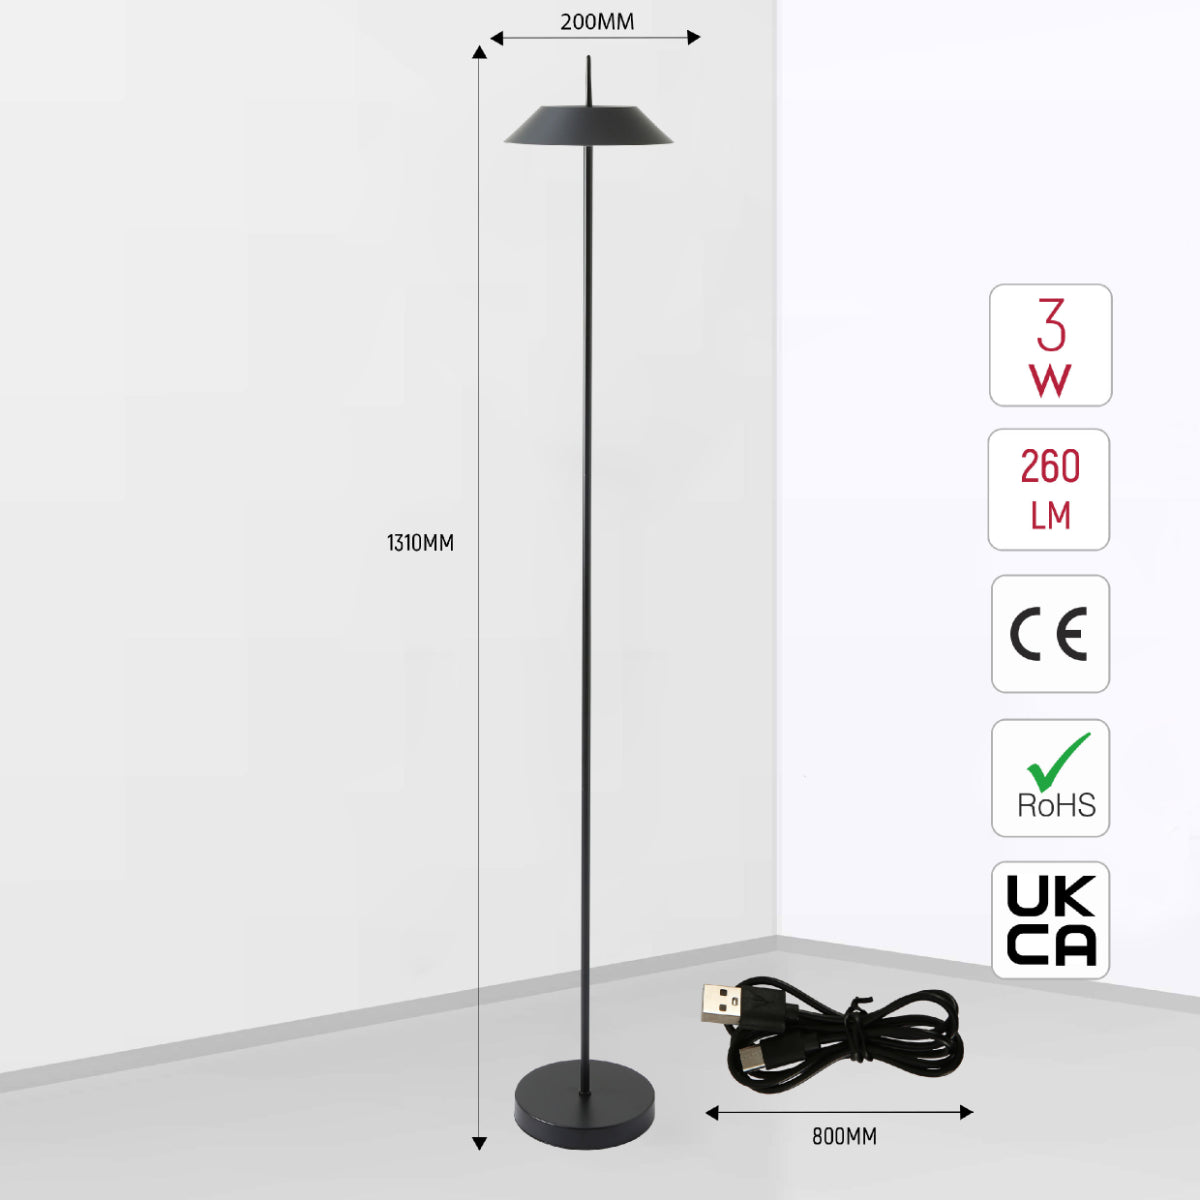 Size and certifications of Portable LED Floor Lamp with Dimmable CCT - Sleek Design, 131cm 130-03538